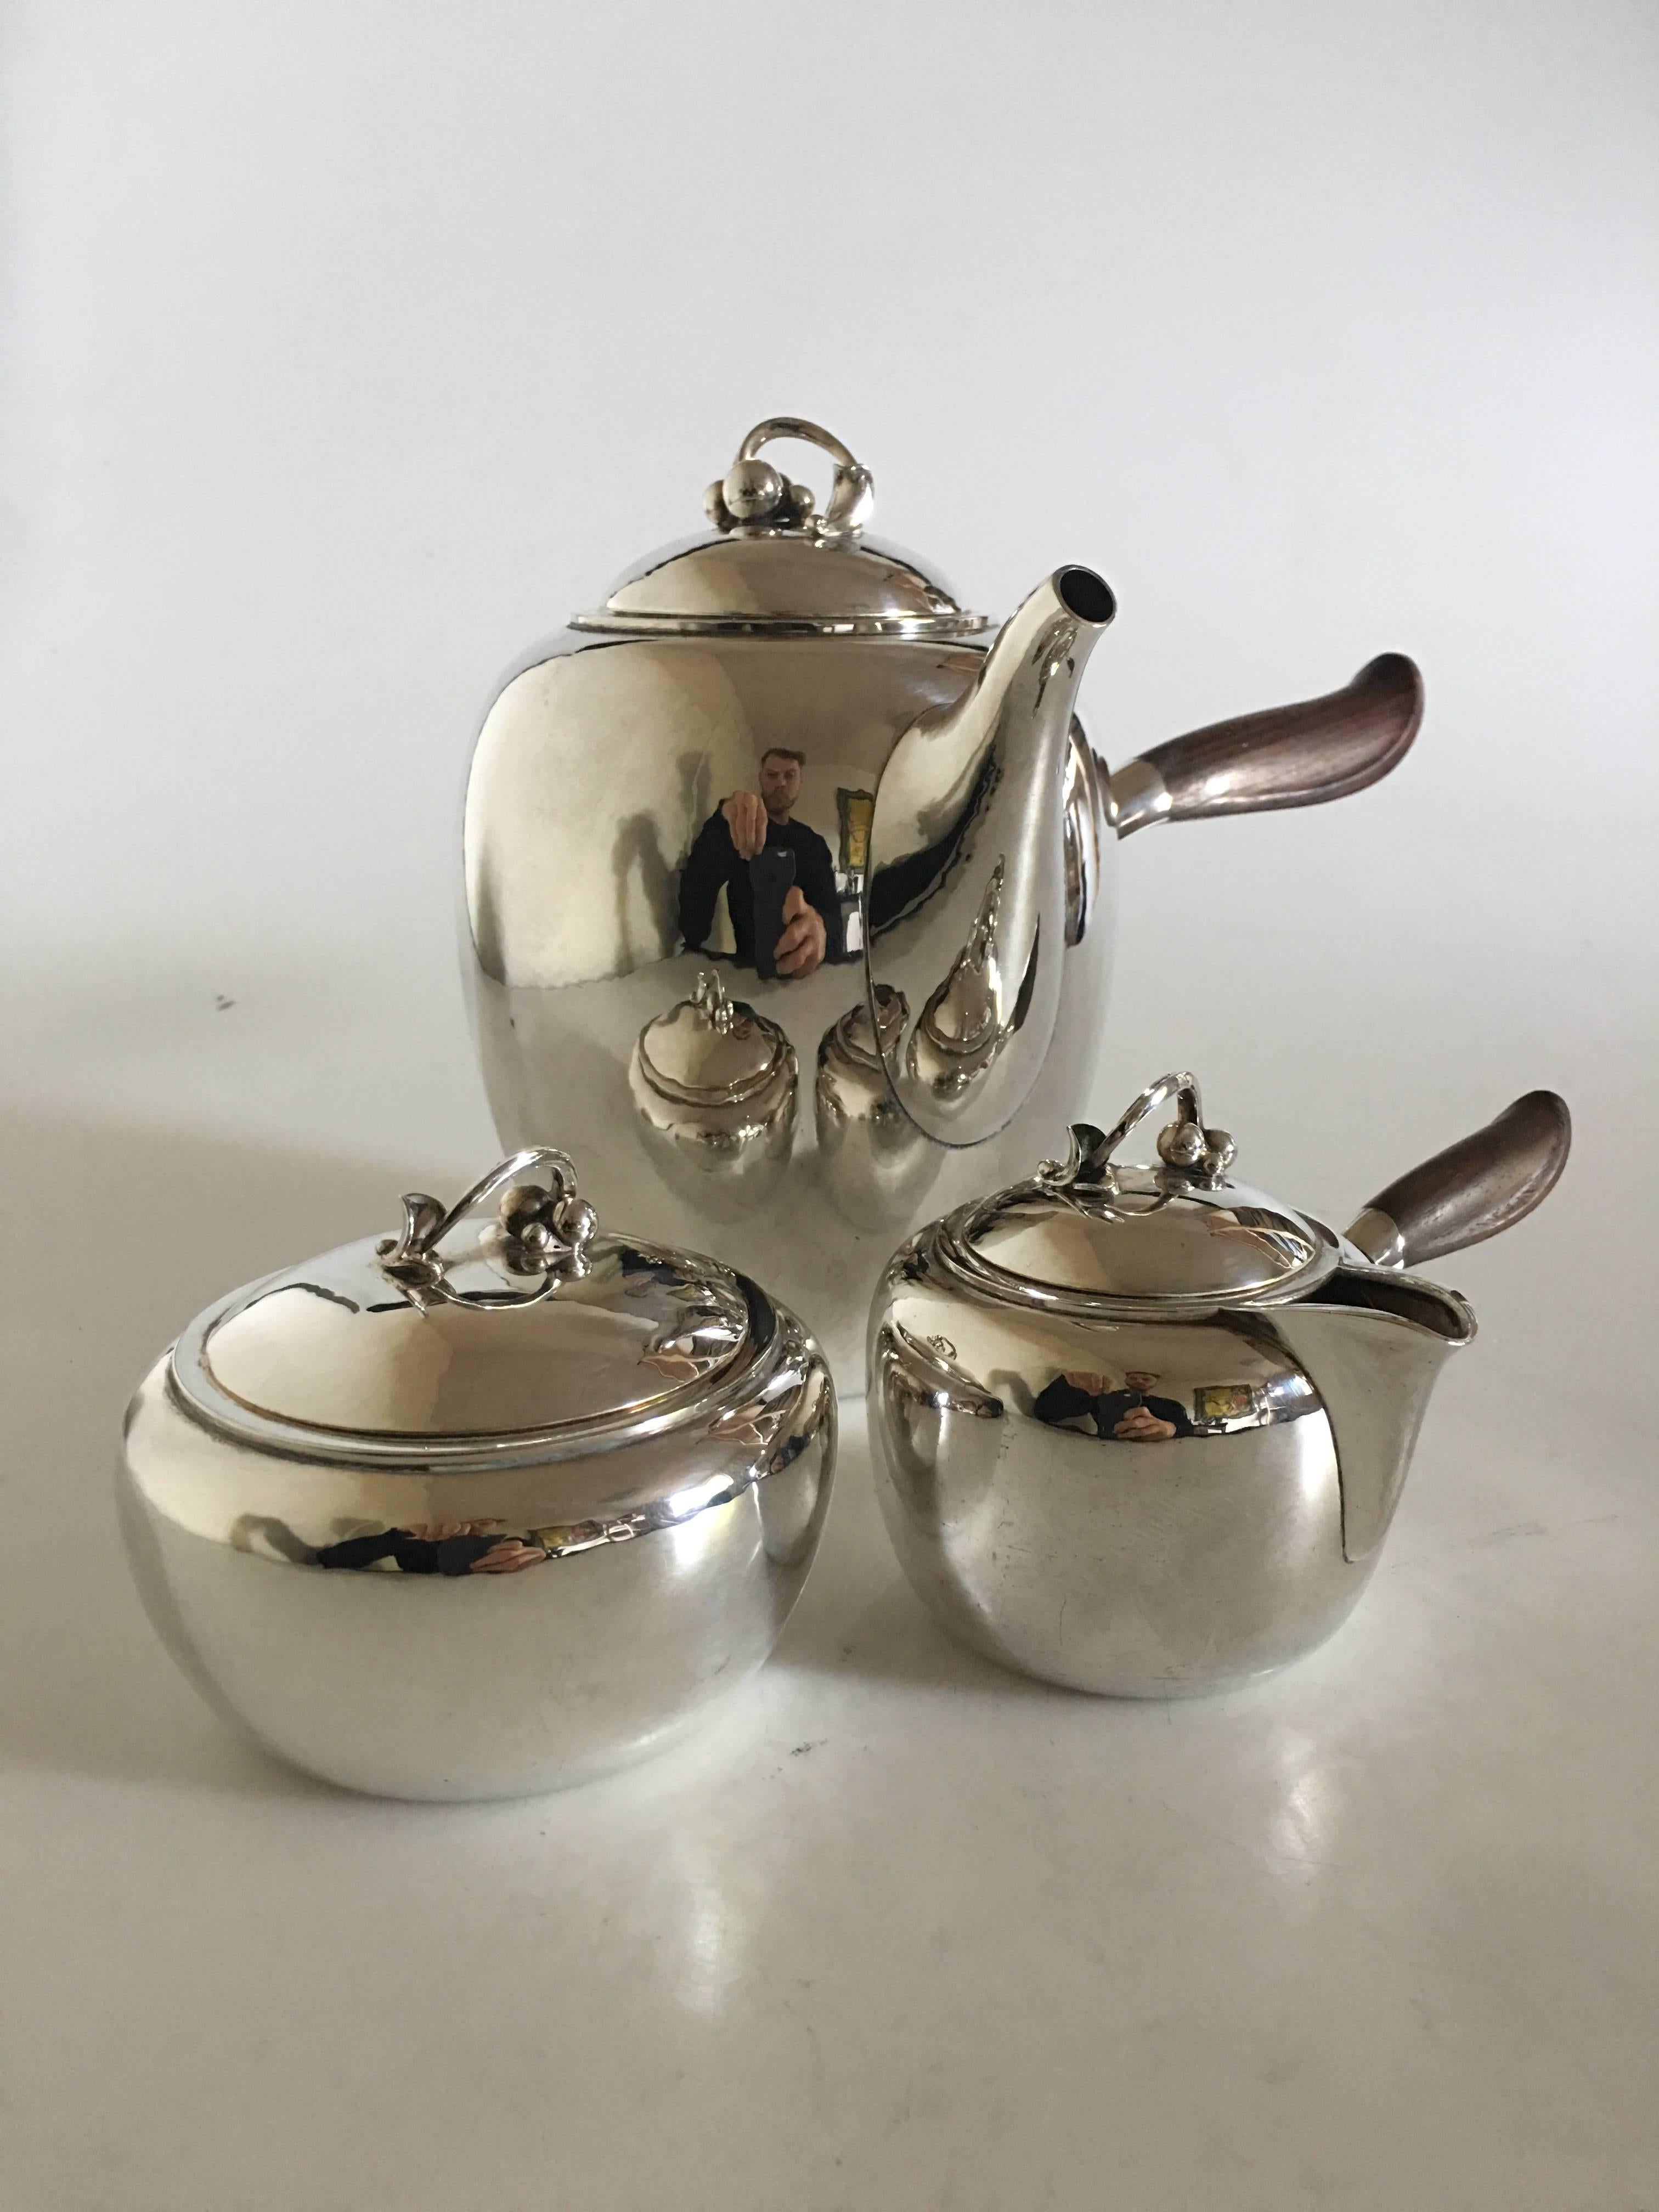 Georg Jensen sterling silver coffee pot, creamer, sukker bowl by Harald Nielsen #875. Pot measures 22.5cm x 16.5cm, creamer 15cm x 9cm and sugar 10cm x 7.5cm. In perfect condition.